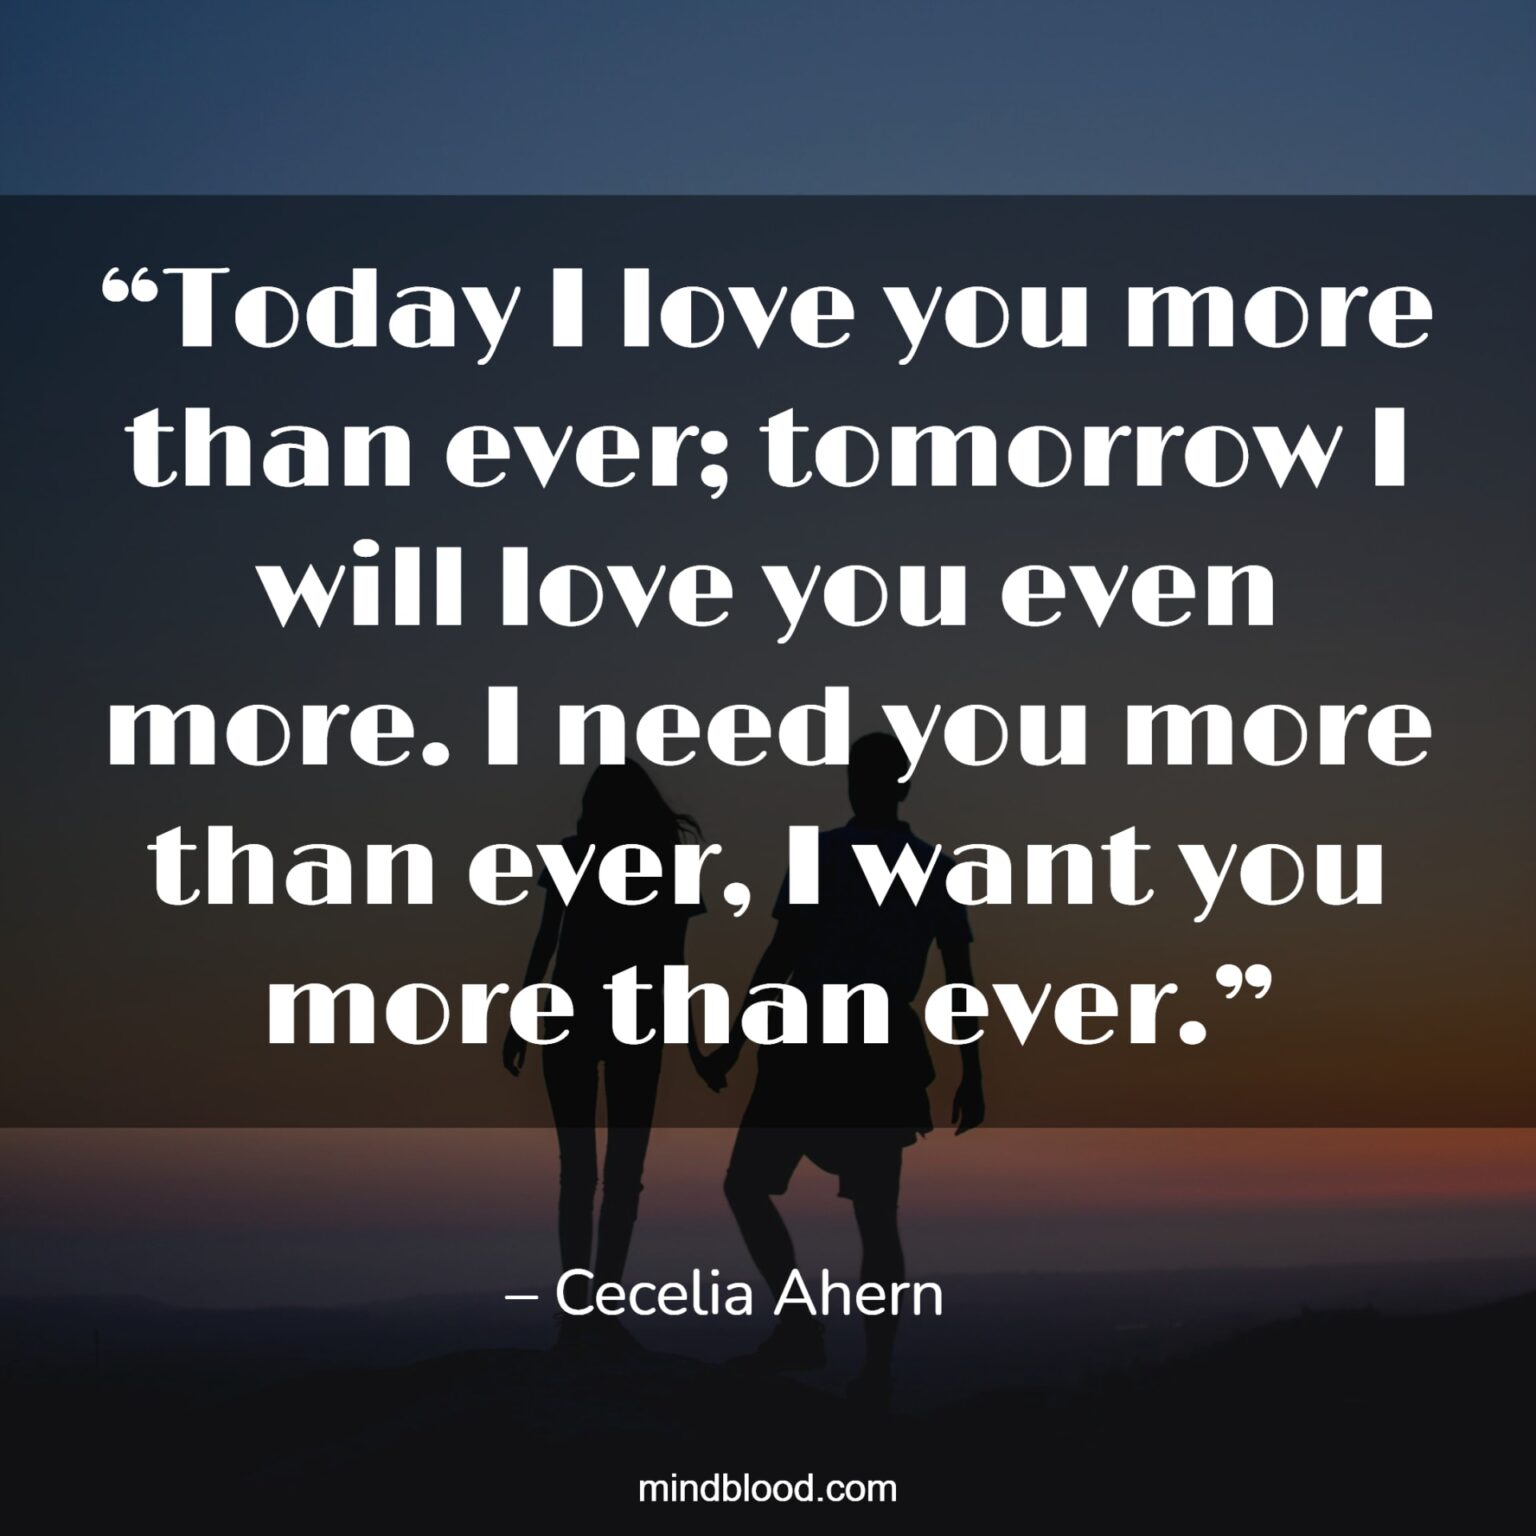 I Love You More Than You Will Ever Know Quotes.